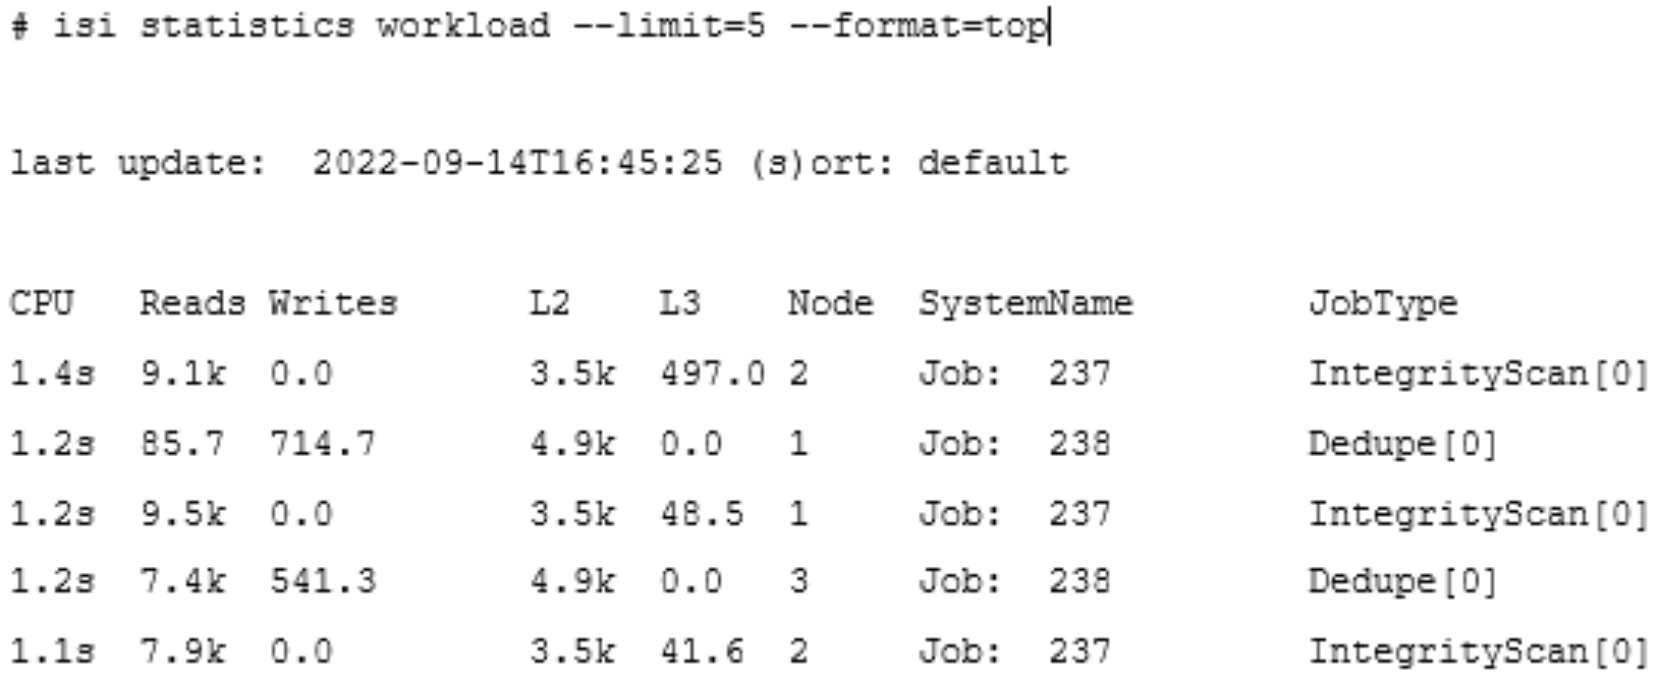 Sample command line output from the 'isi statistics workload' command showing the top five processes on a cluster.